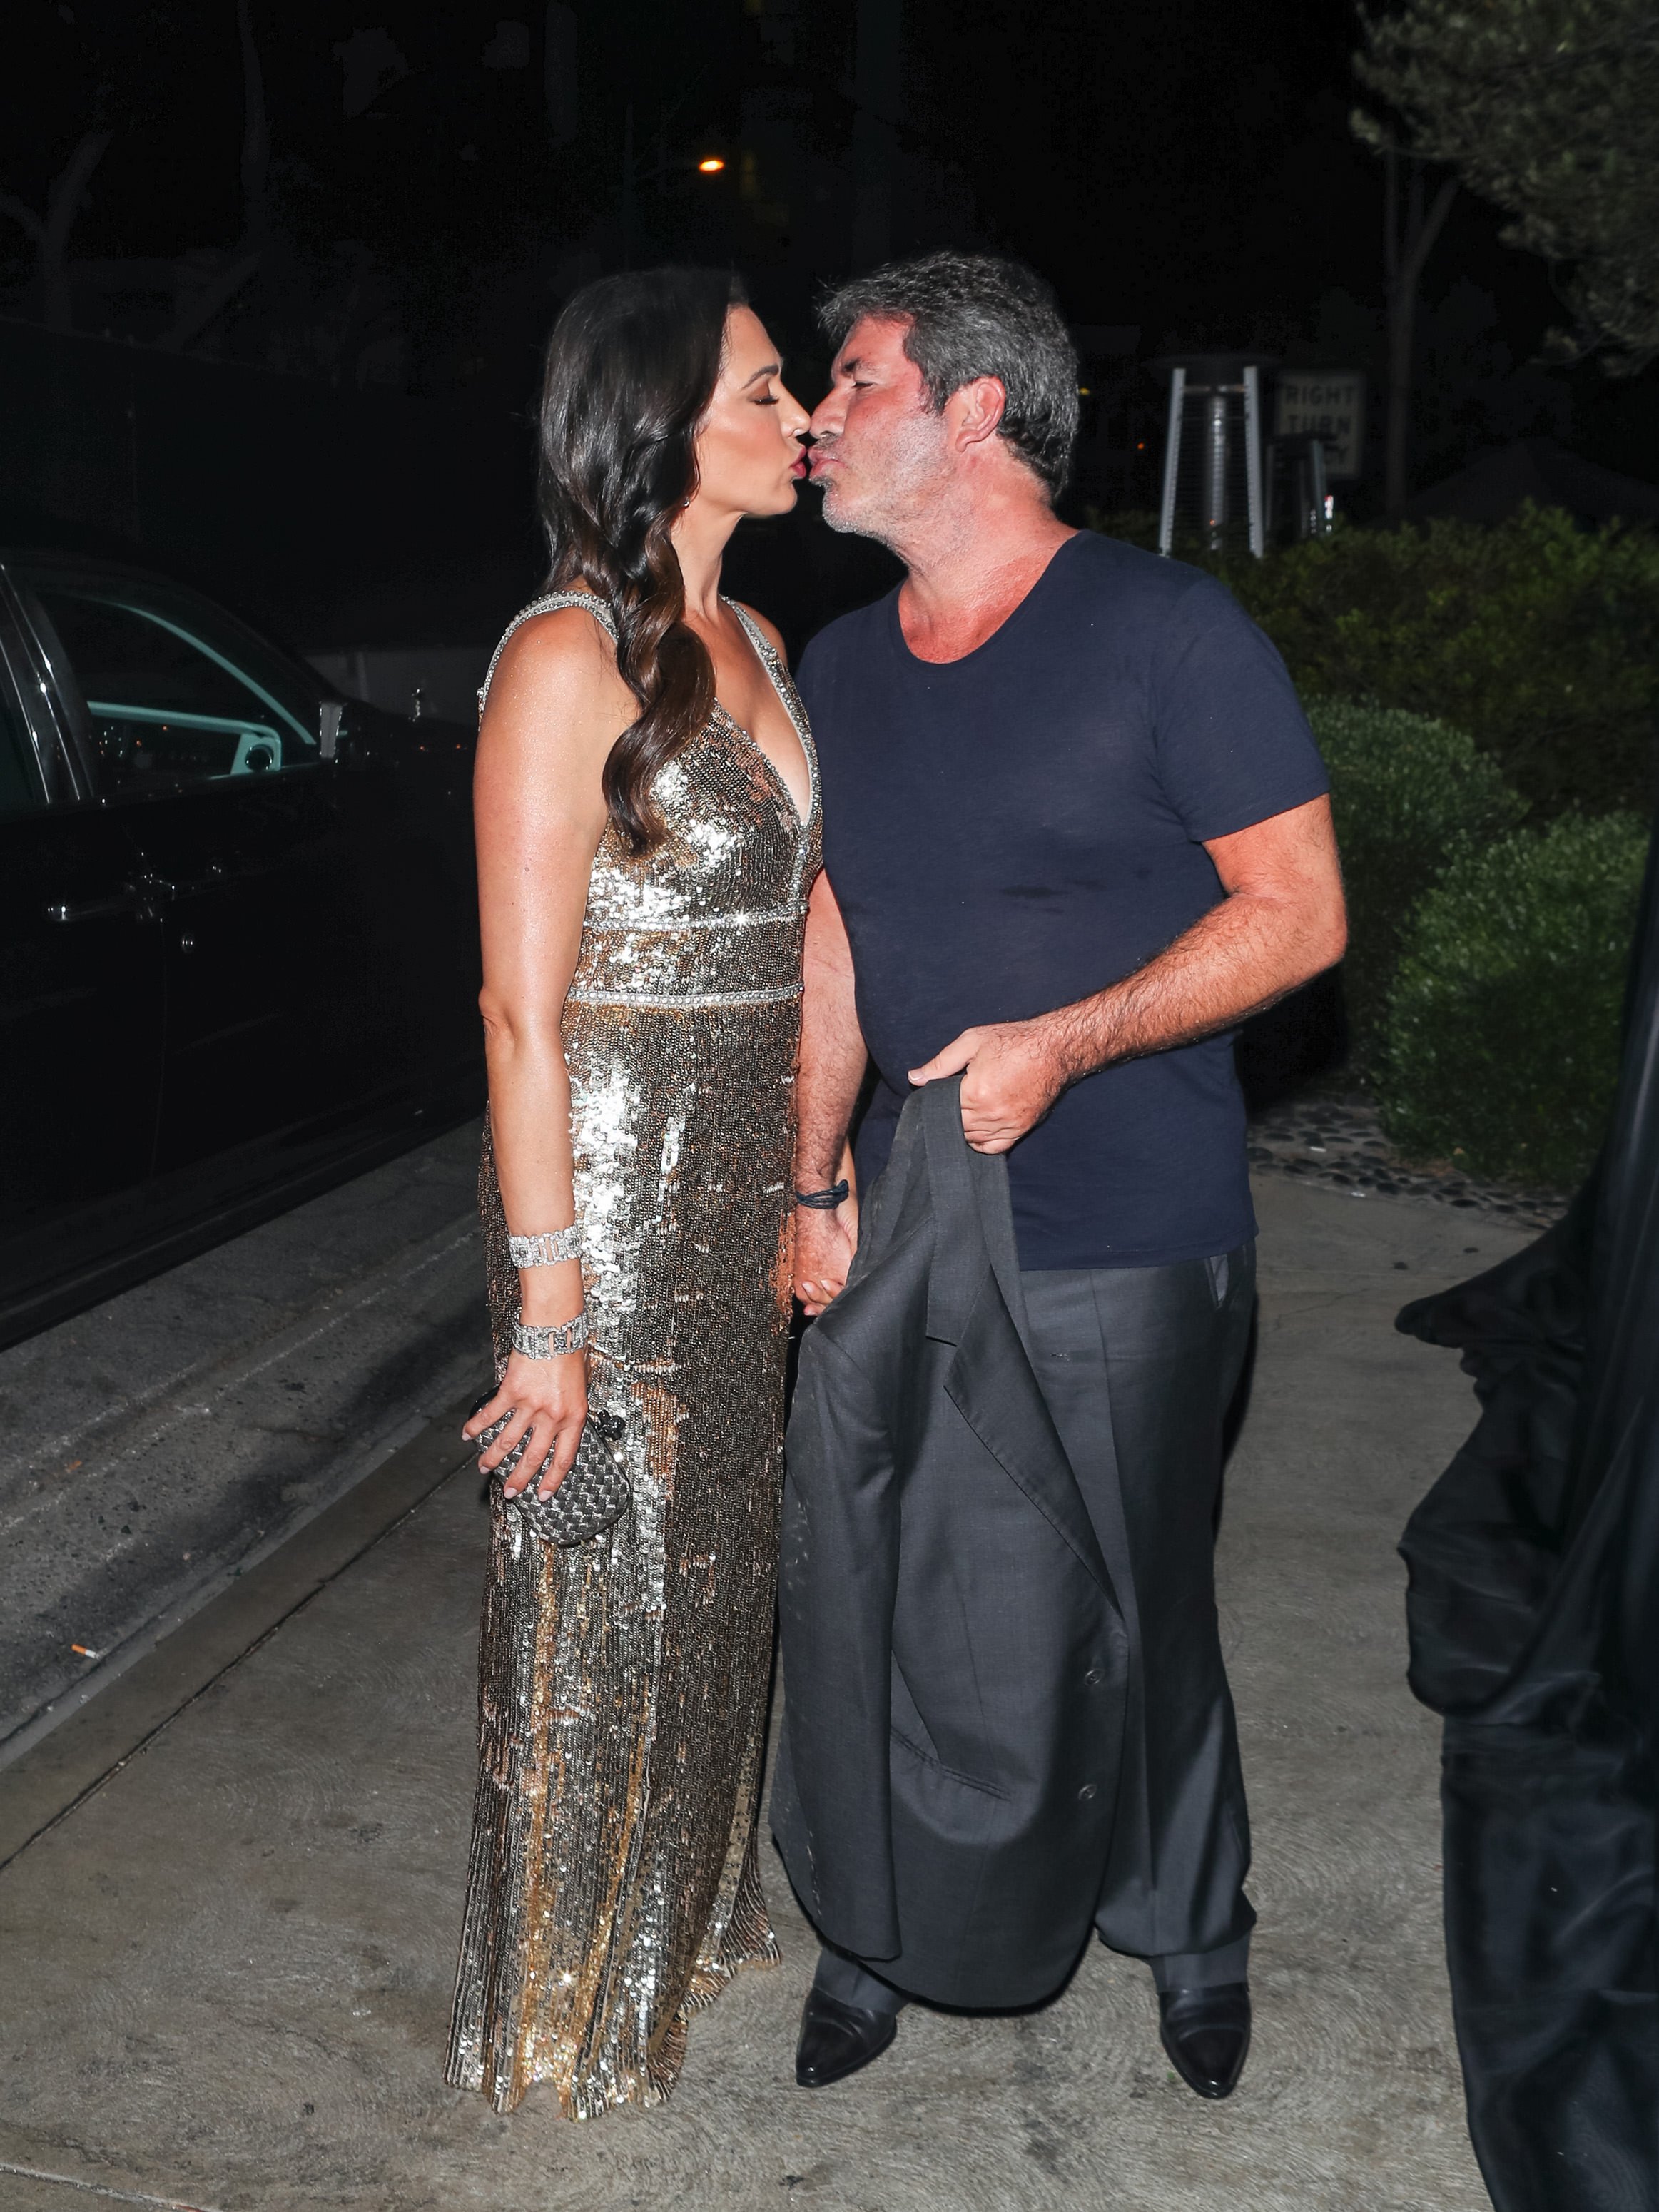 Simon Cowell and Lauren Silverman are seen on August 22, 2018 in Los Angeles, California. | Source: Getty Images